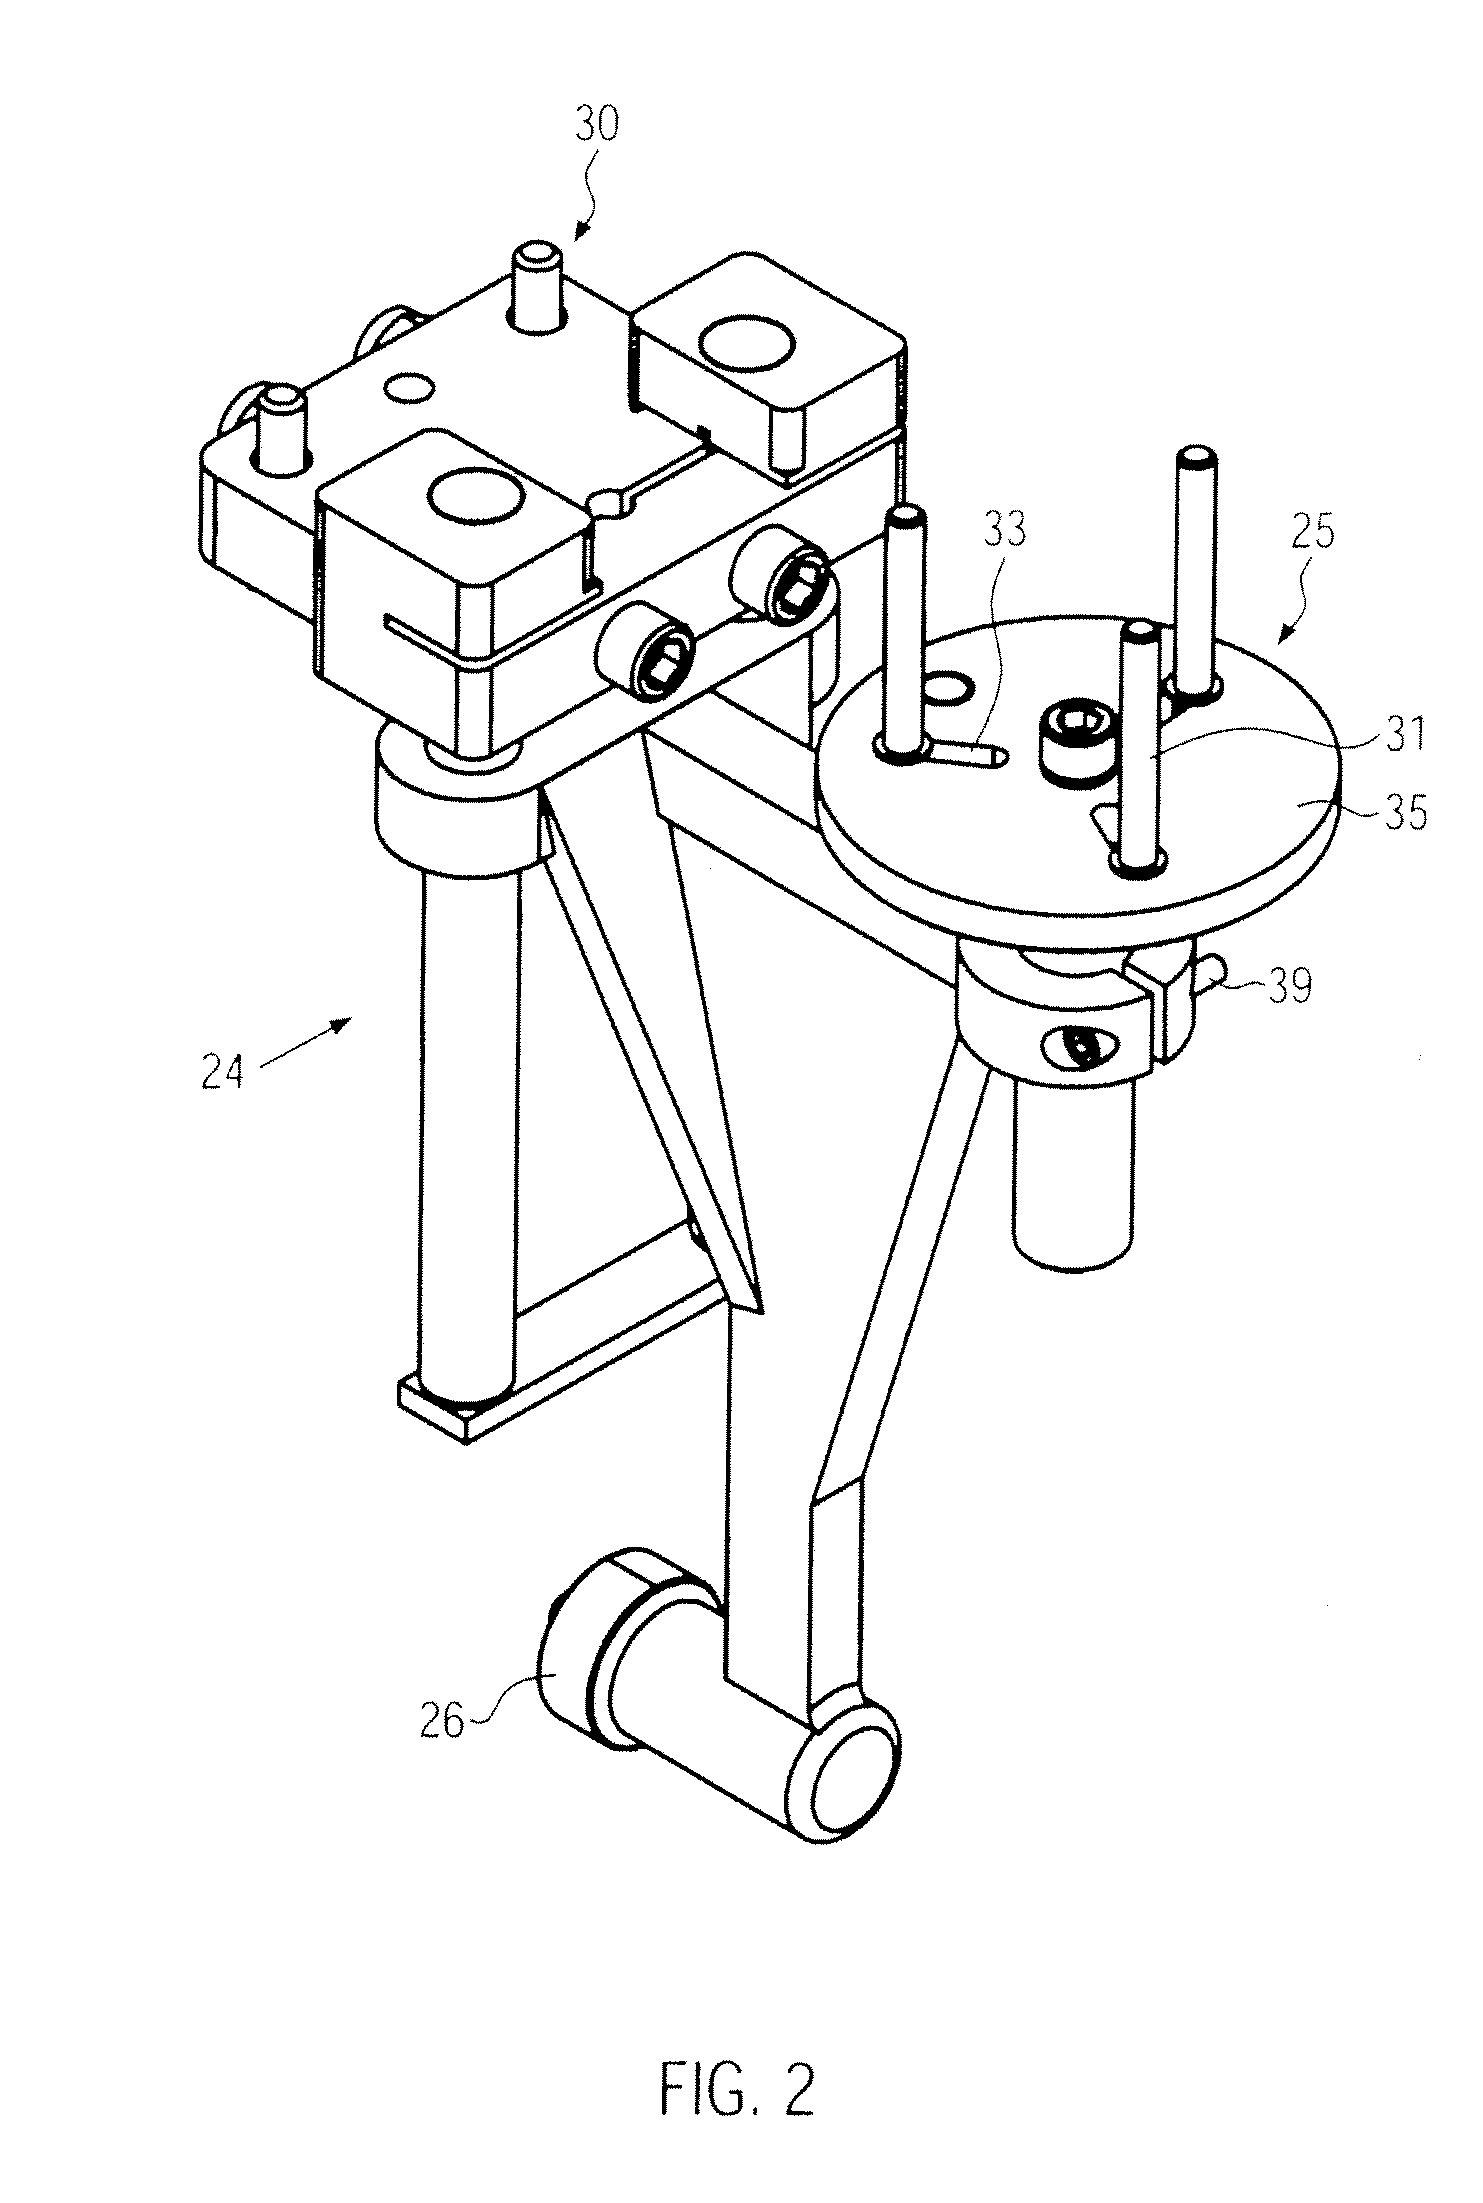 Labeler and a labeling method for labeling plastic bottles in a blow mold, in particular in a rotary blow molder